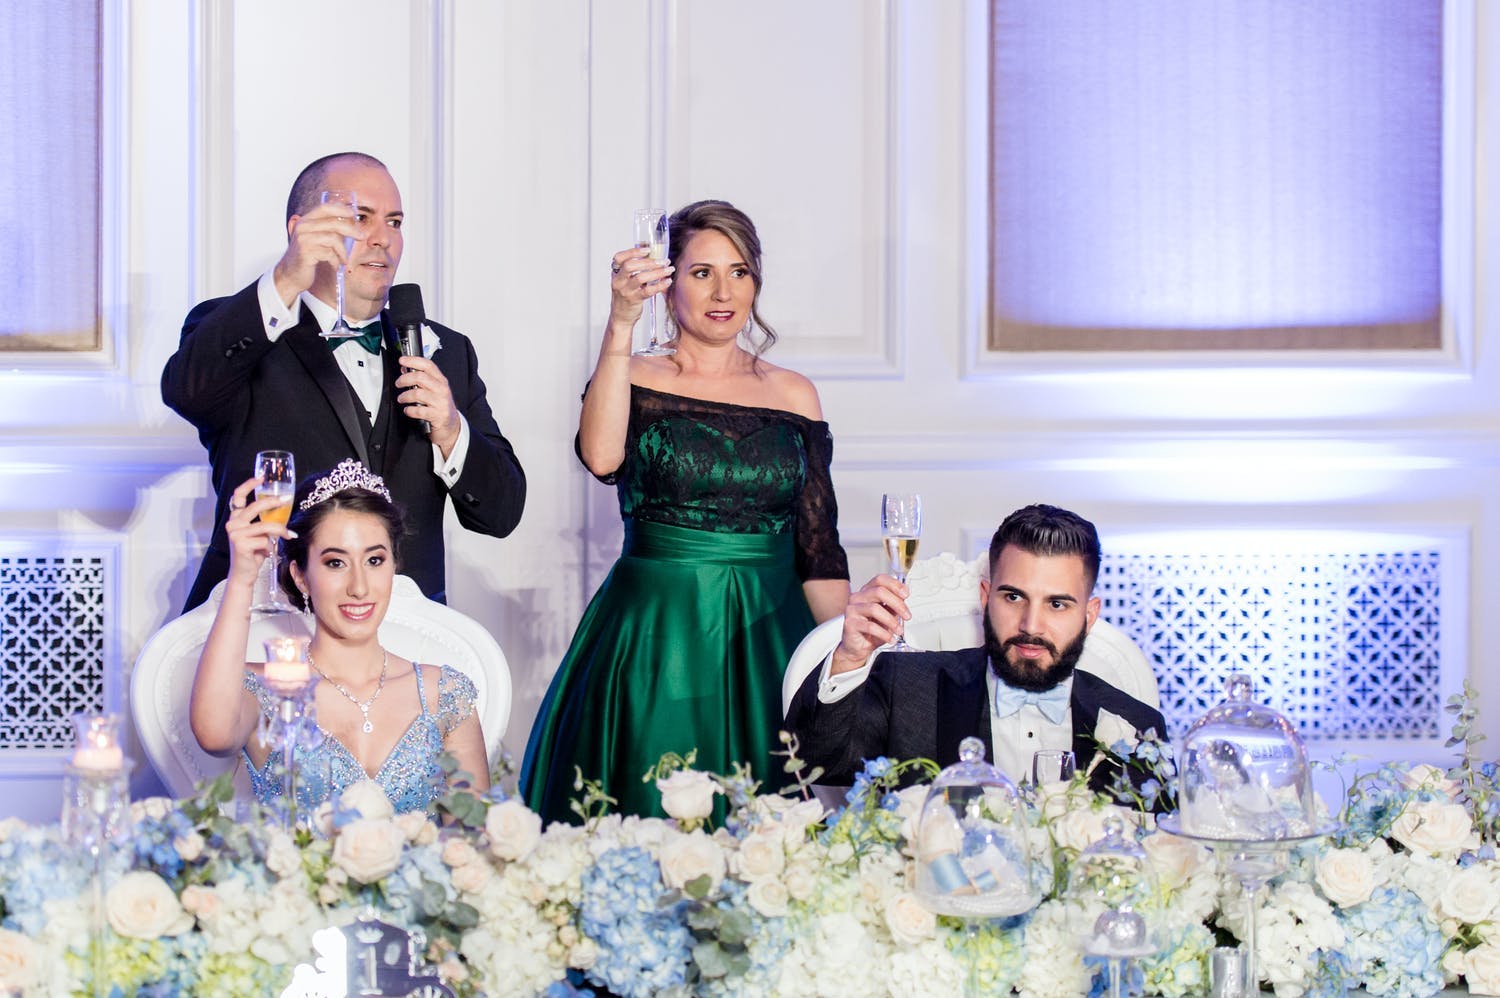 Parents and chambelan escort raise a toast, one of many common quinceañera traditions, for celebrant at fairytale reception | PartySlate